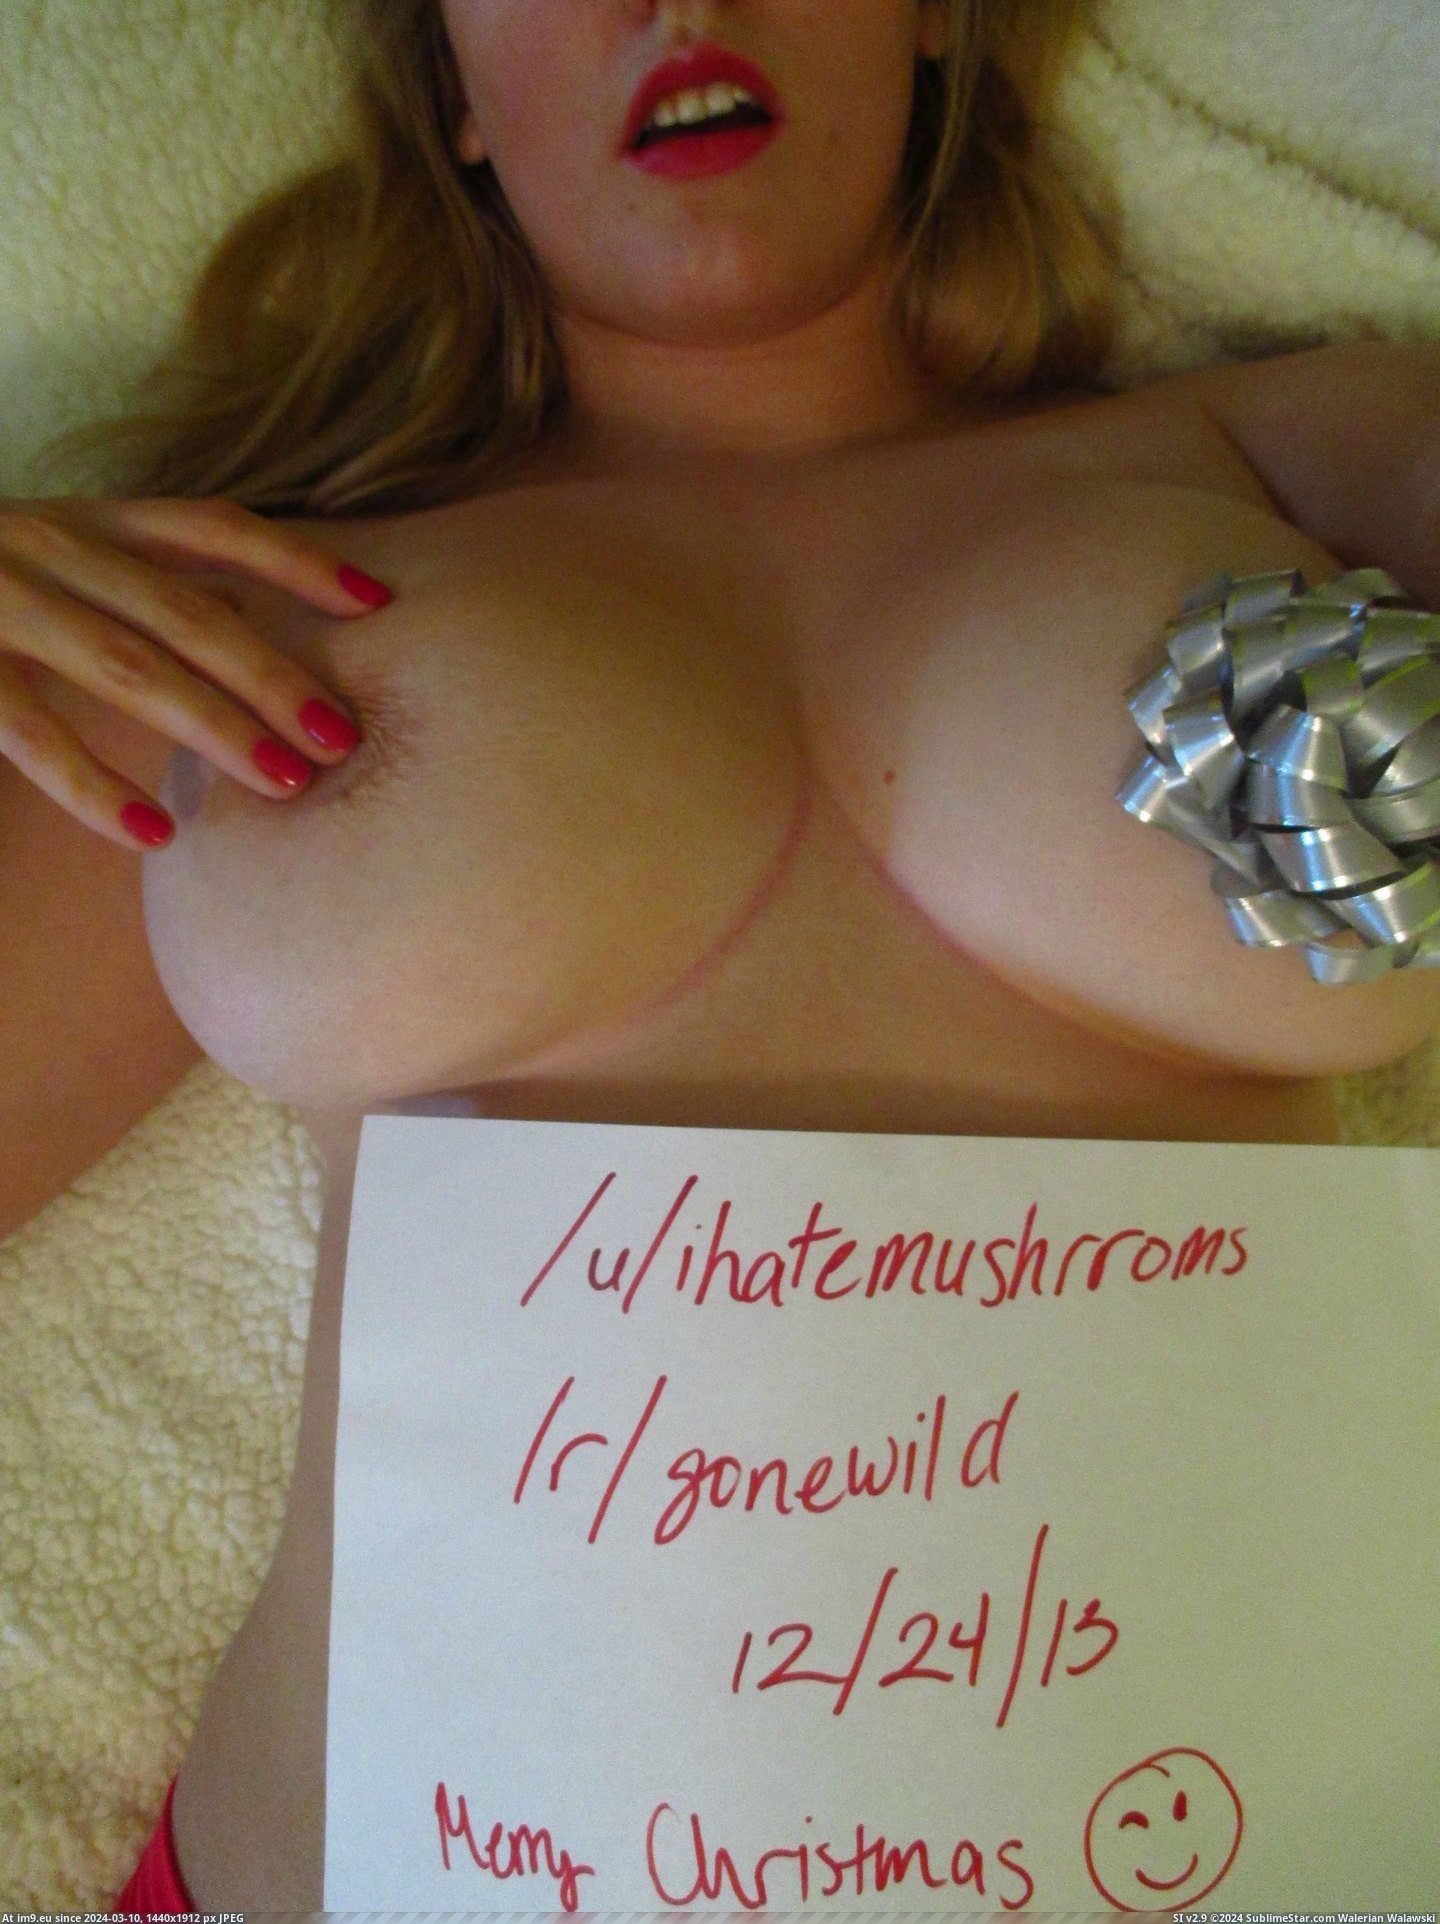 #For #Verification #Exchange #Downstairs #Peek #Unwrap [Gonewild] Who's up for a gi[f]t exchange? I'll unwrap myself for some verification (plus a little peek downstairs) 3 Pic. (Obraz z album My r/GONEWILD favs))